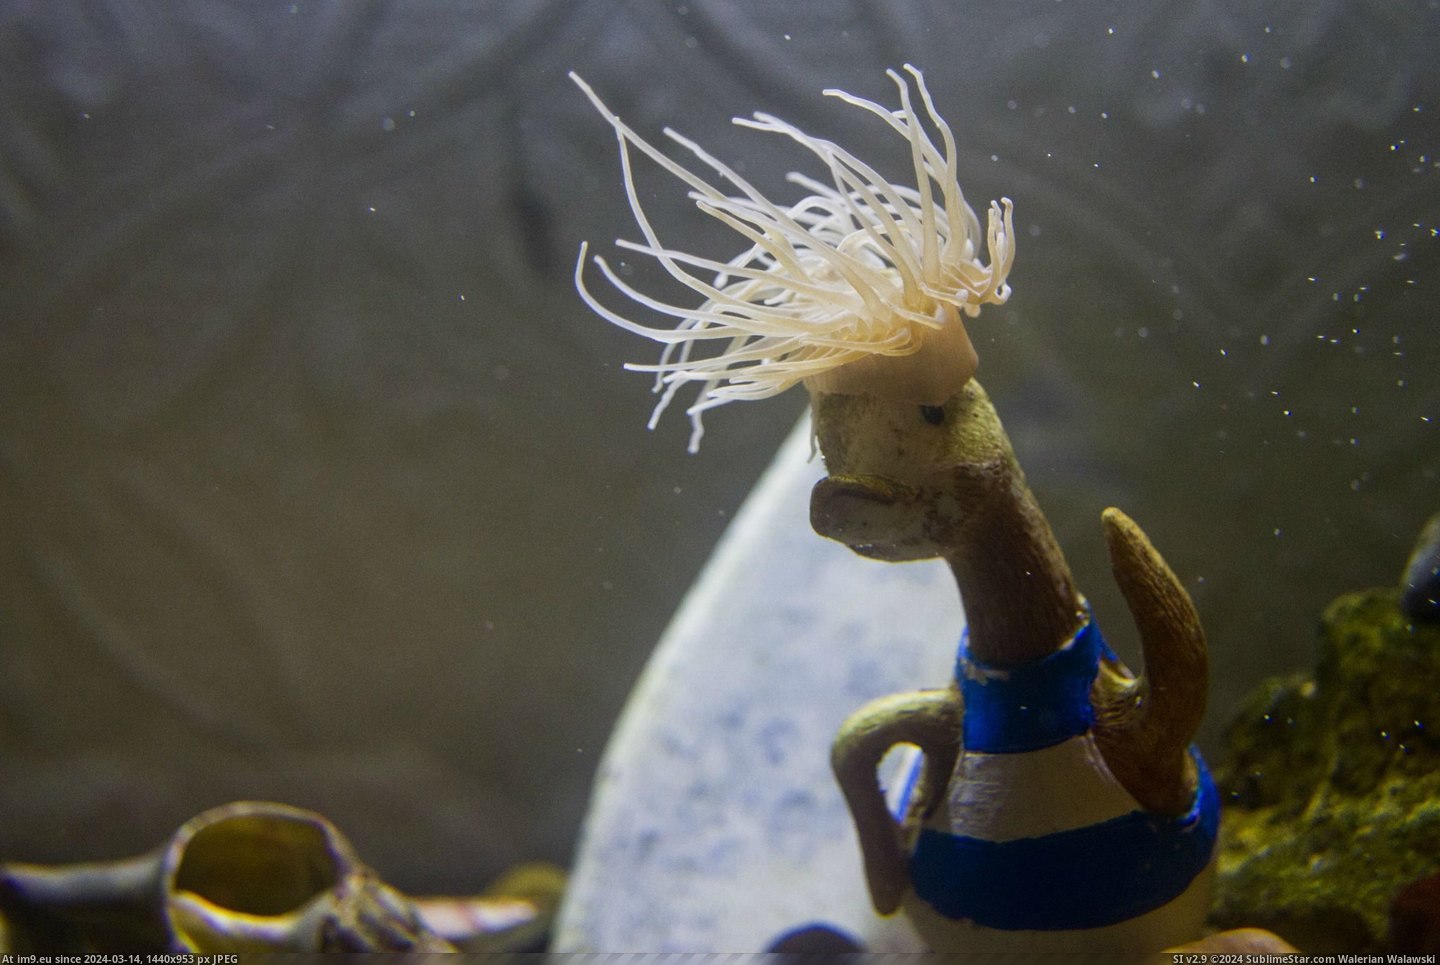 #Beautiful #Head #Decided #Tank #Ornament #Anemone #Latch #Sea #Giving #Duck [Pics] My snakelock anemone has decided to latch onto the head of the sassy duck ornament in my sea tank, giving it beautiful lo Pic. (Bild von album My r/PICS favs))